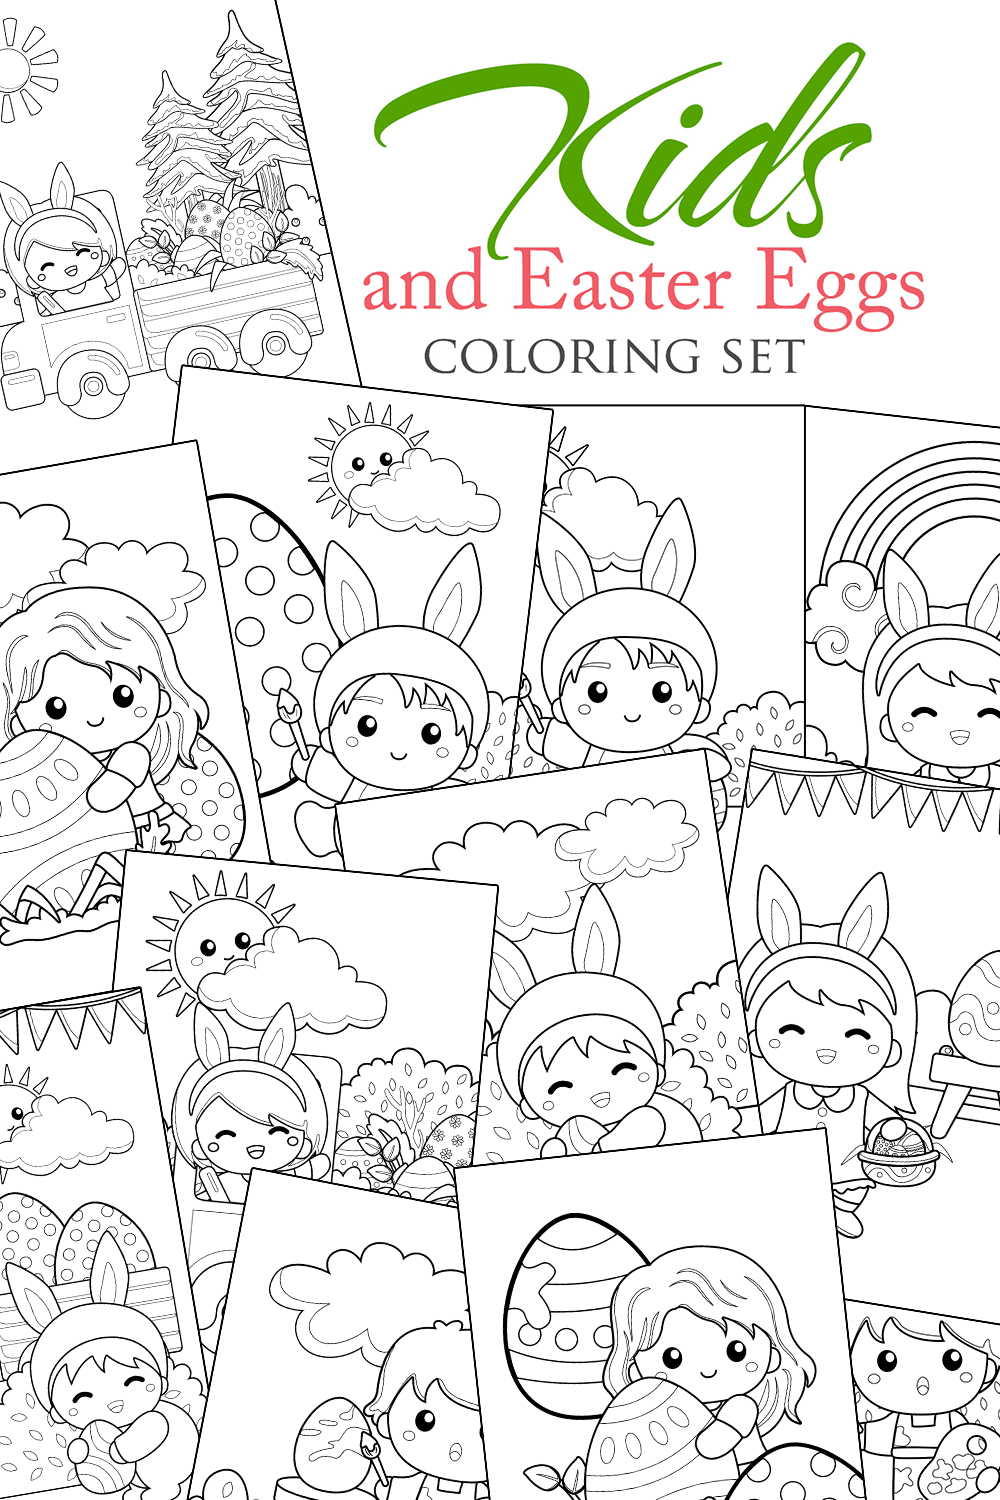 Holiday Easter Eggs Coloring Pages Activity For Kids And Adult pinterest preview image.